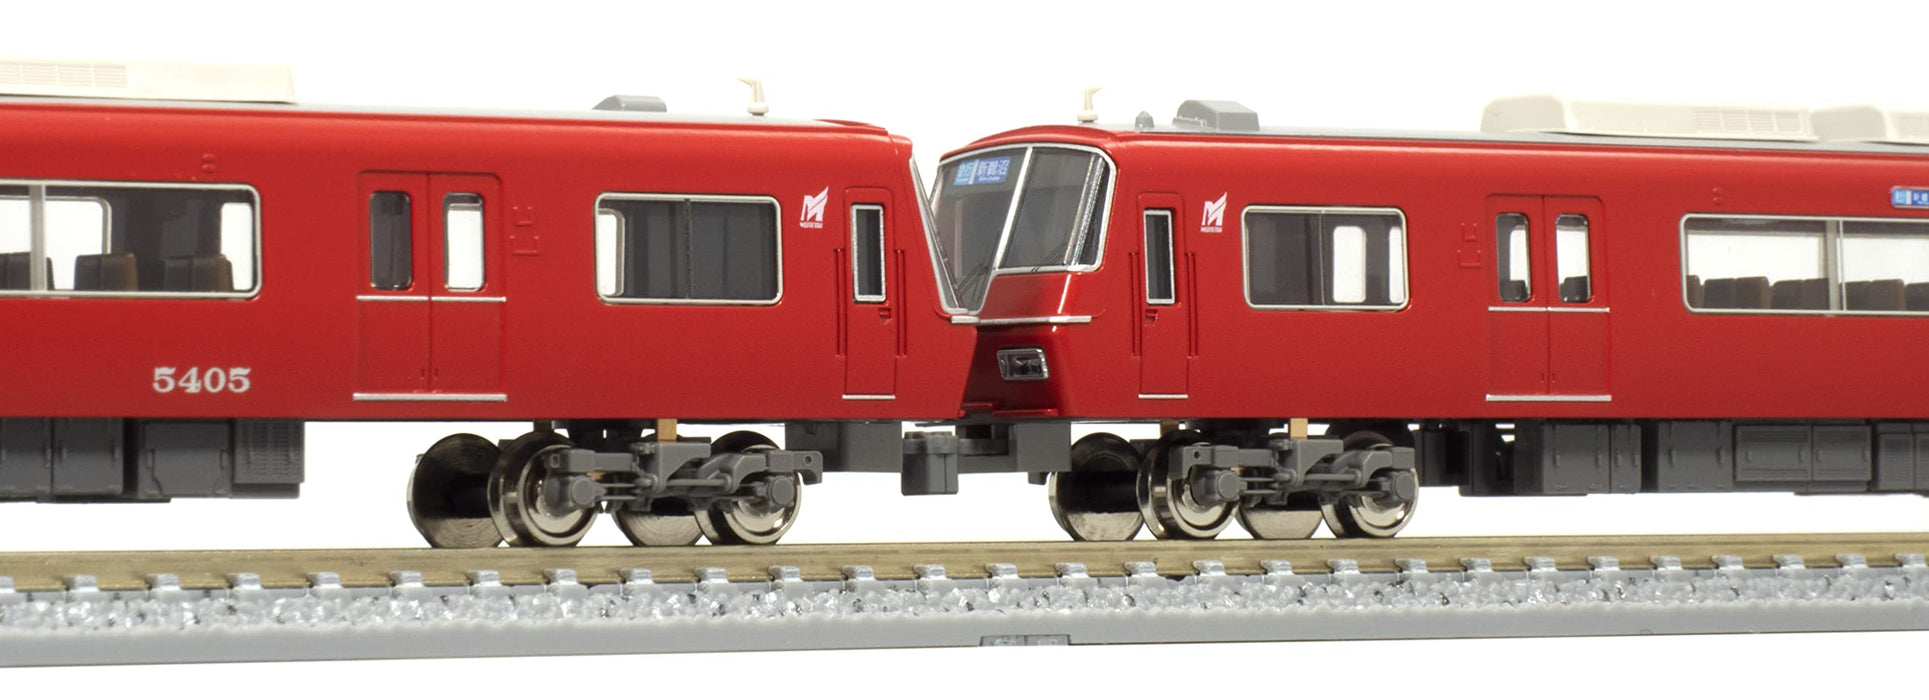 GREENMAX 50699 Meitetsu Series 5300 5305 + 5304 Configuration 8 Cars Set N Scale